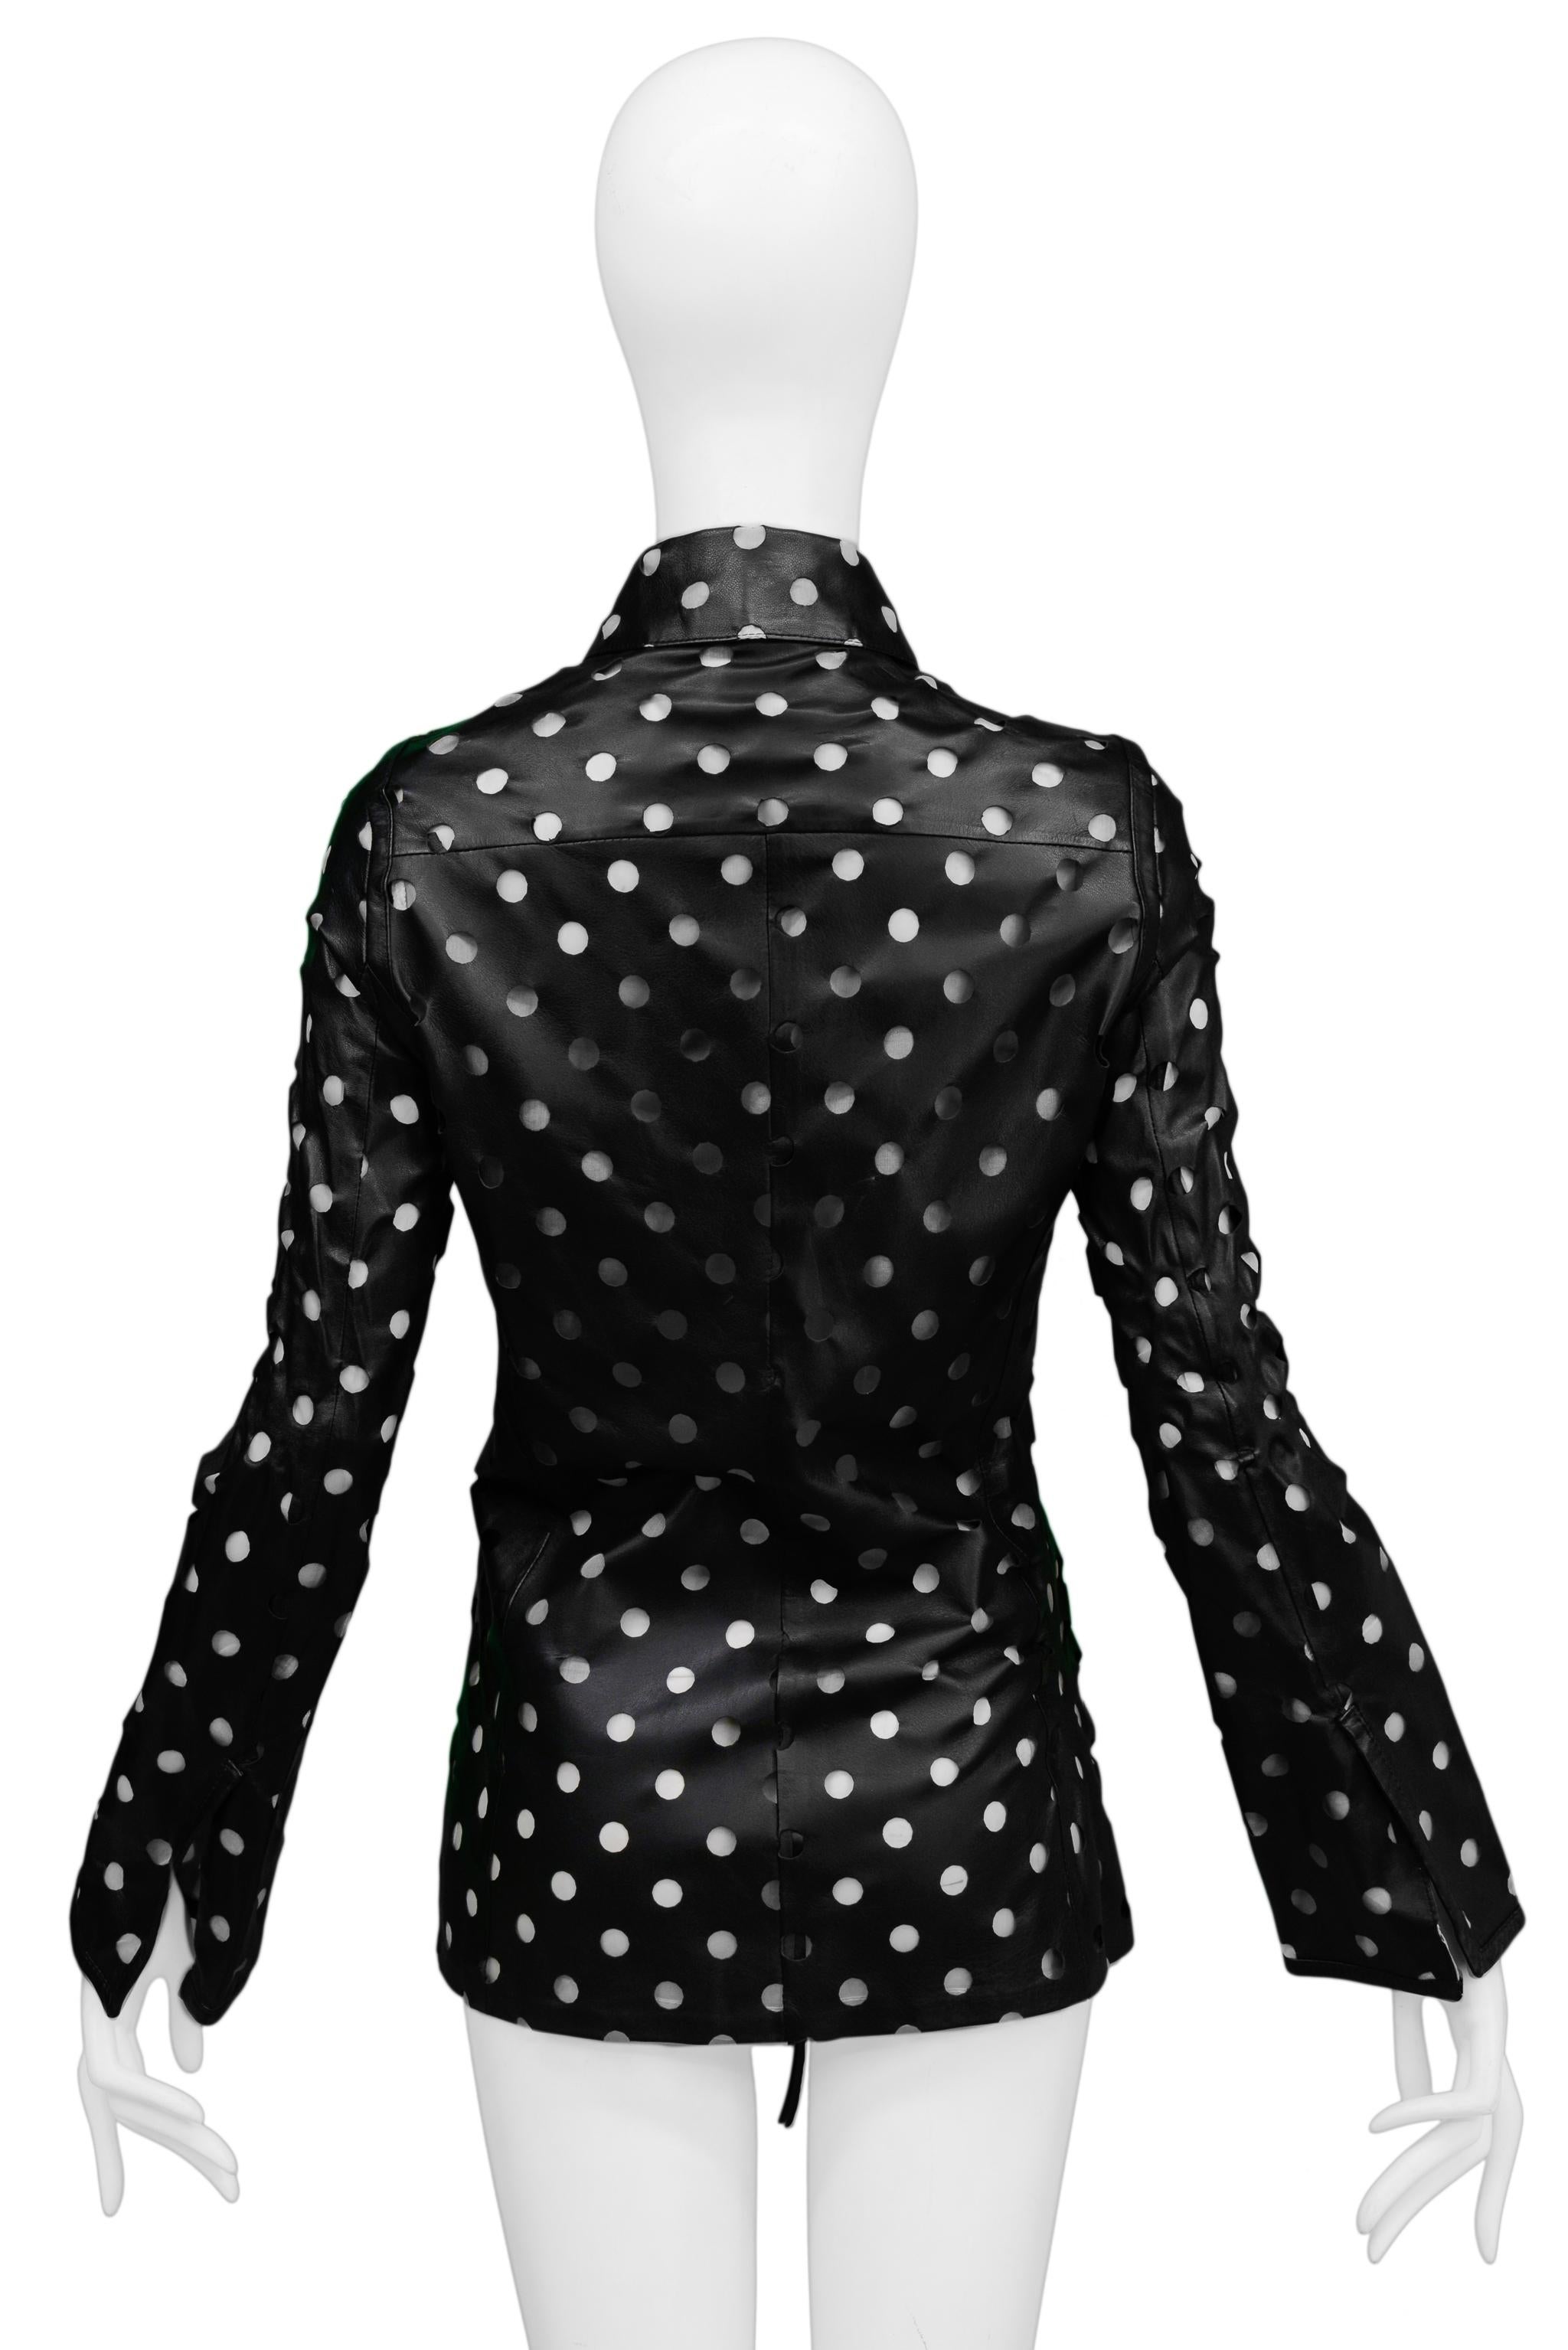 Gianfranco Ferre Black Leather Cut-Out Dot Jacket For Sale 3